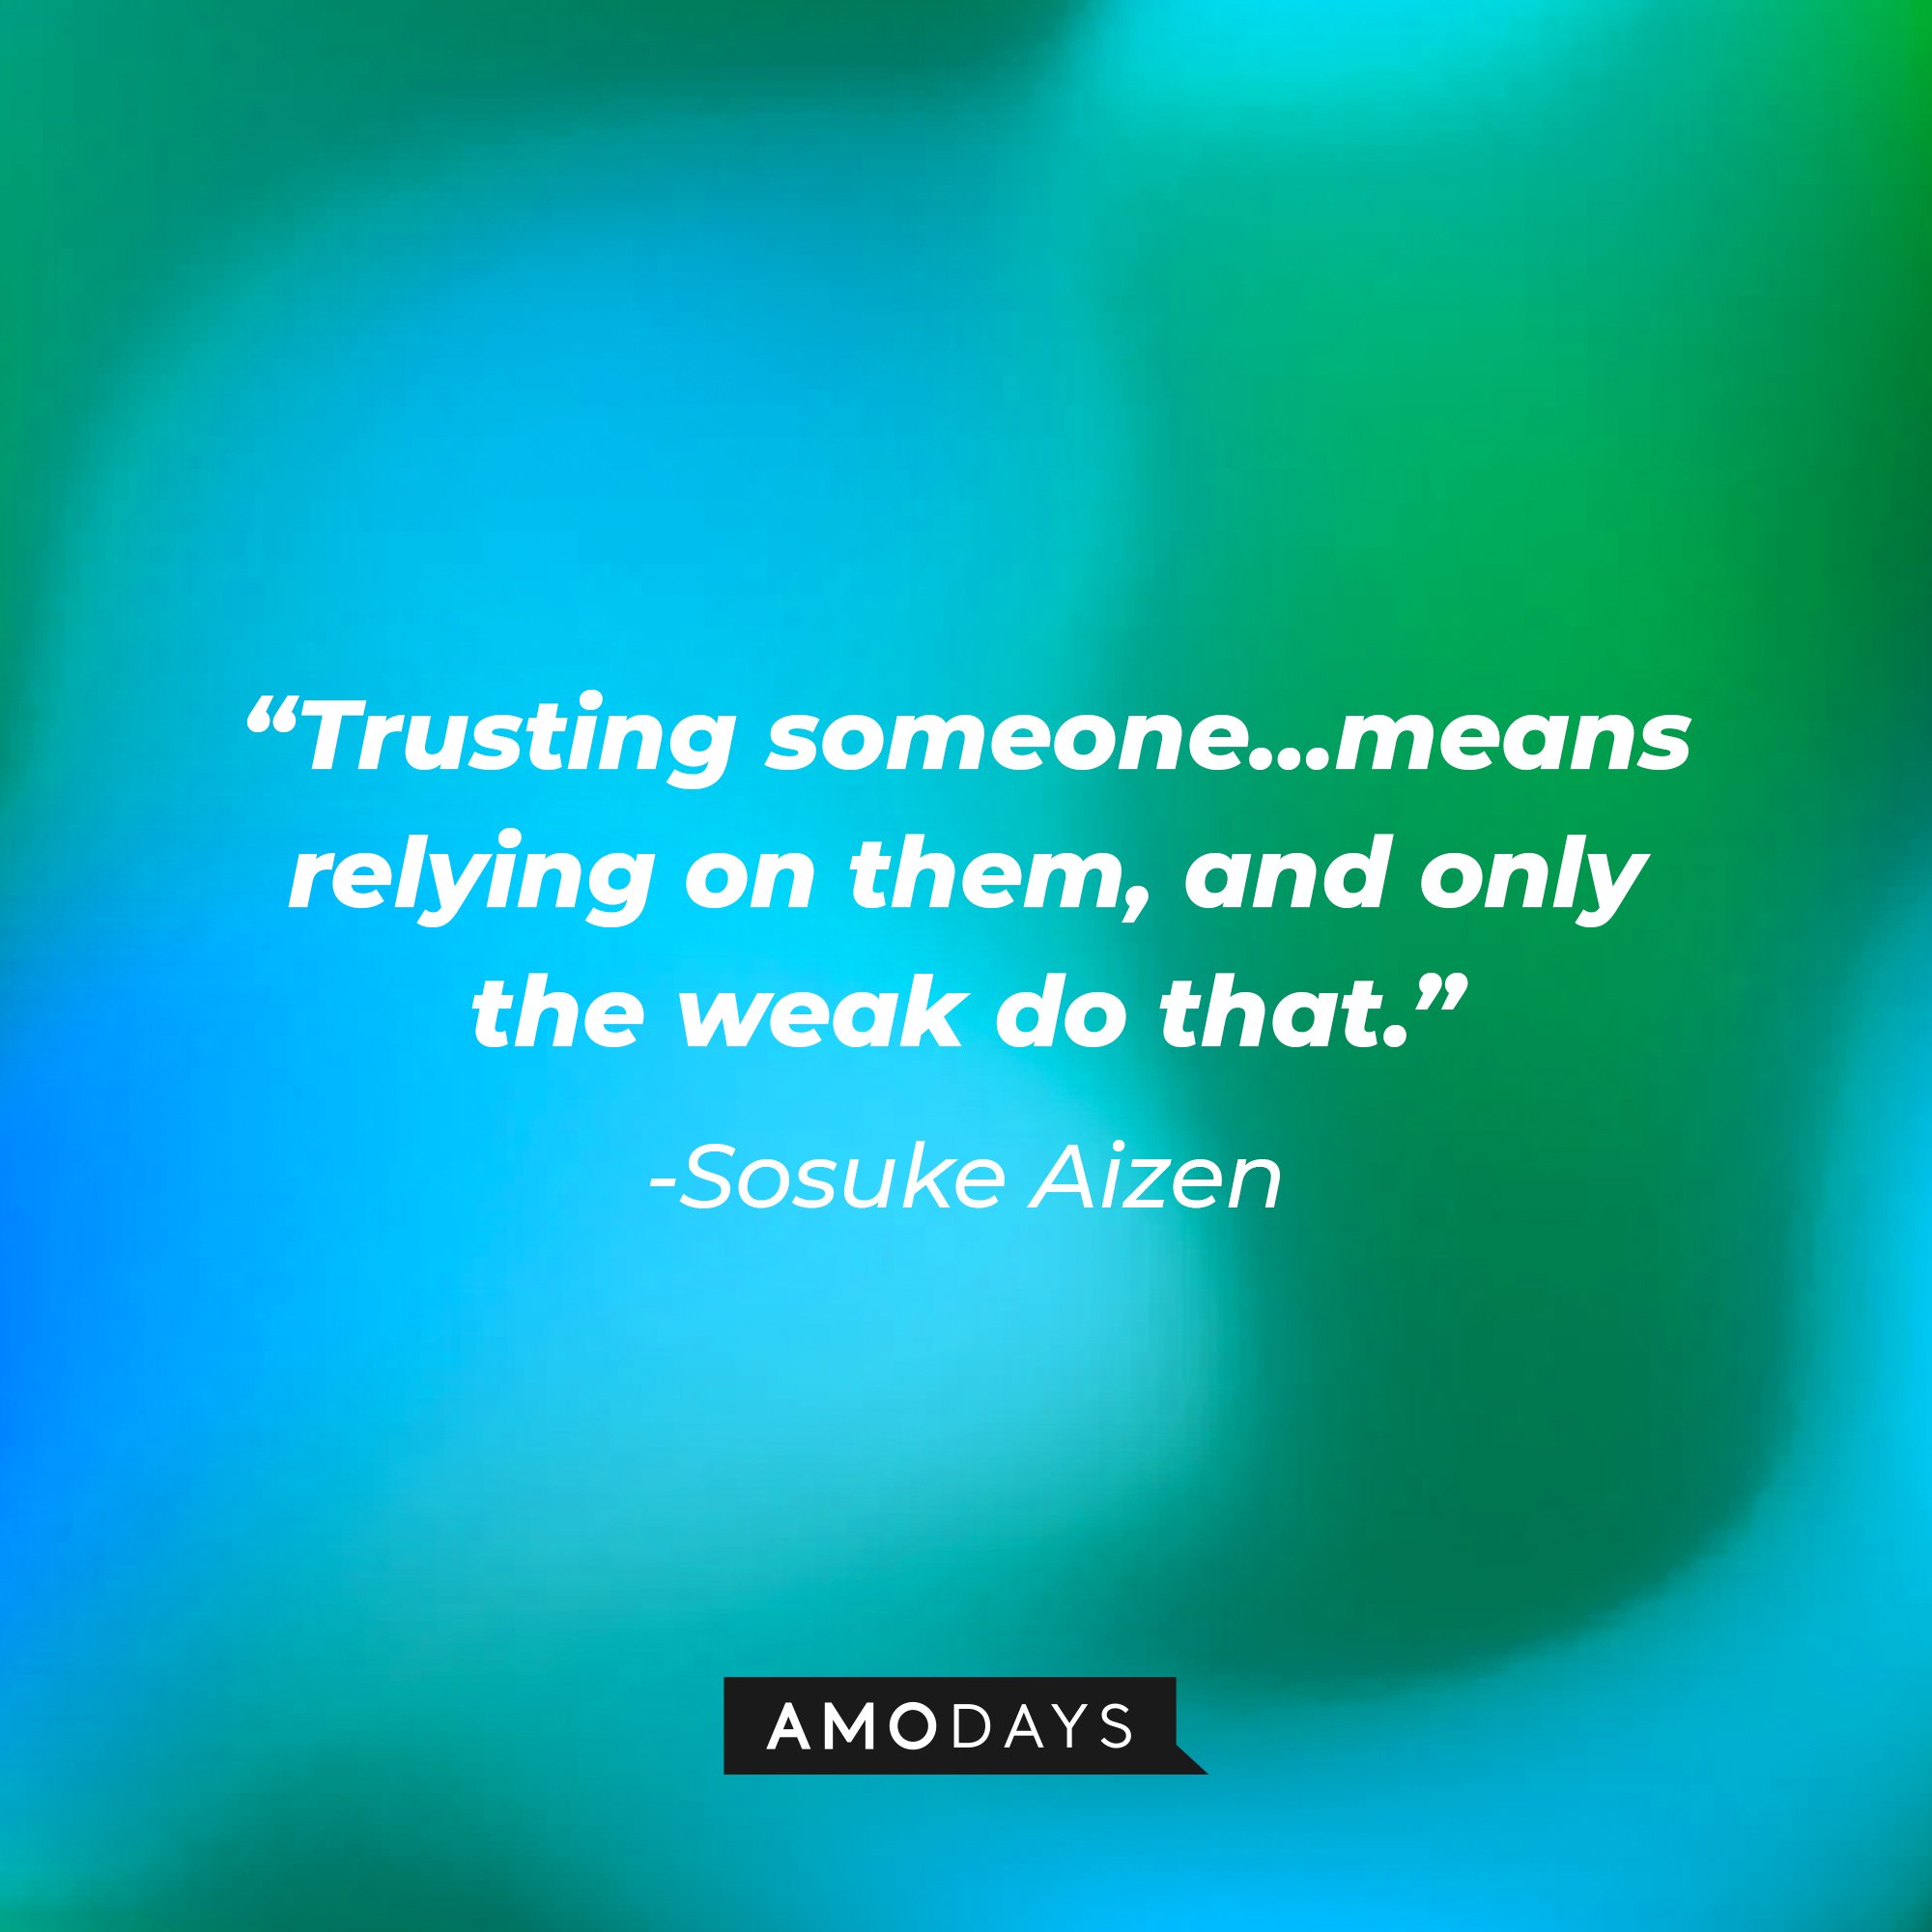 Sosuke Aizen's quote: "Trusting someone…means relying on them, and only the weak do that." | Image: AmoDays